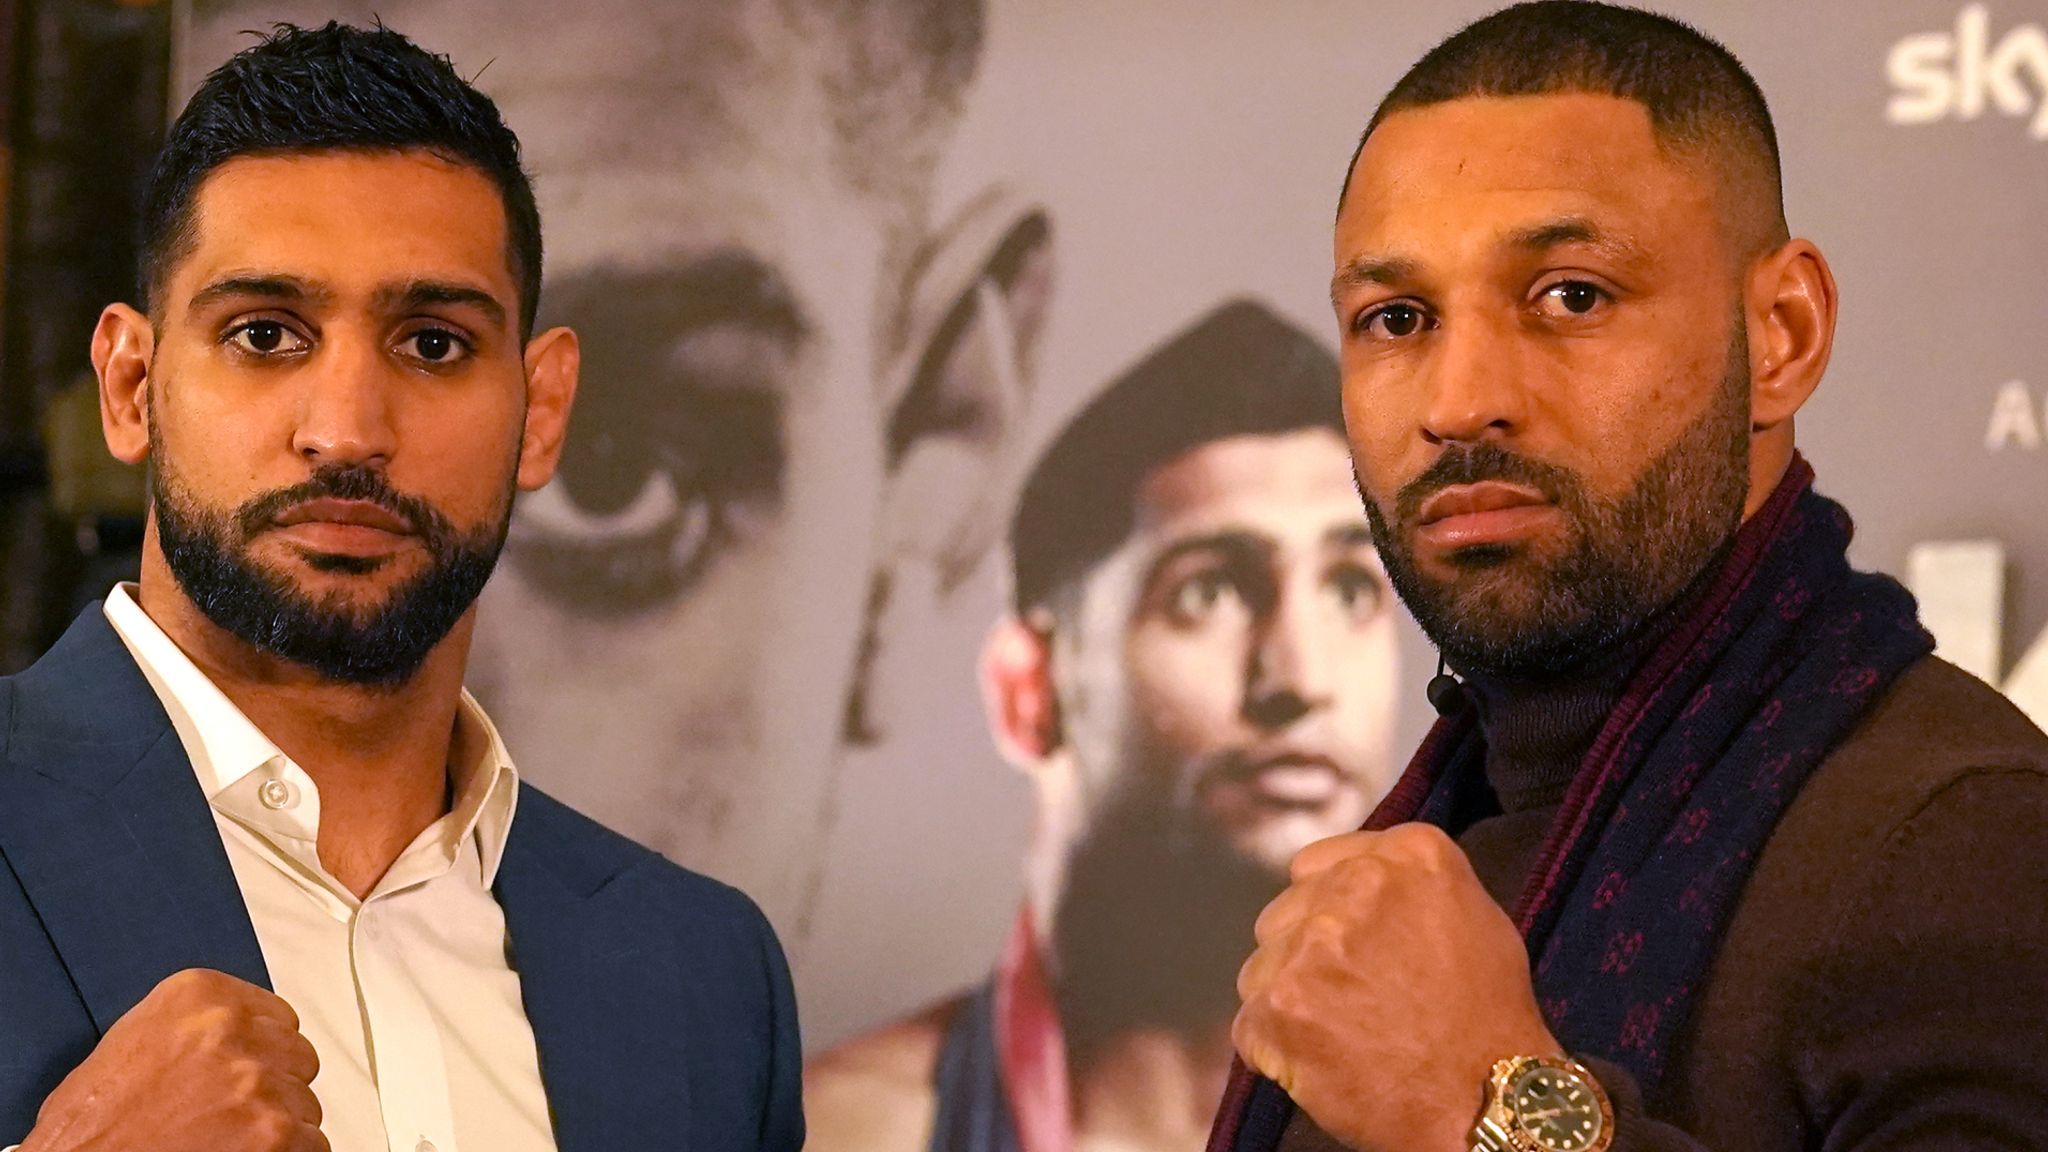 Amir Khan Former light-welterweight world champion ignites war of words with Kell Brook Boxing News Sky Sports